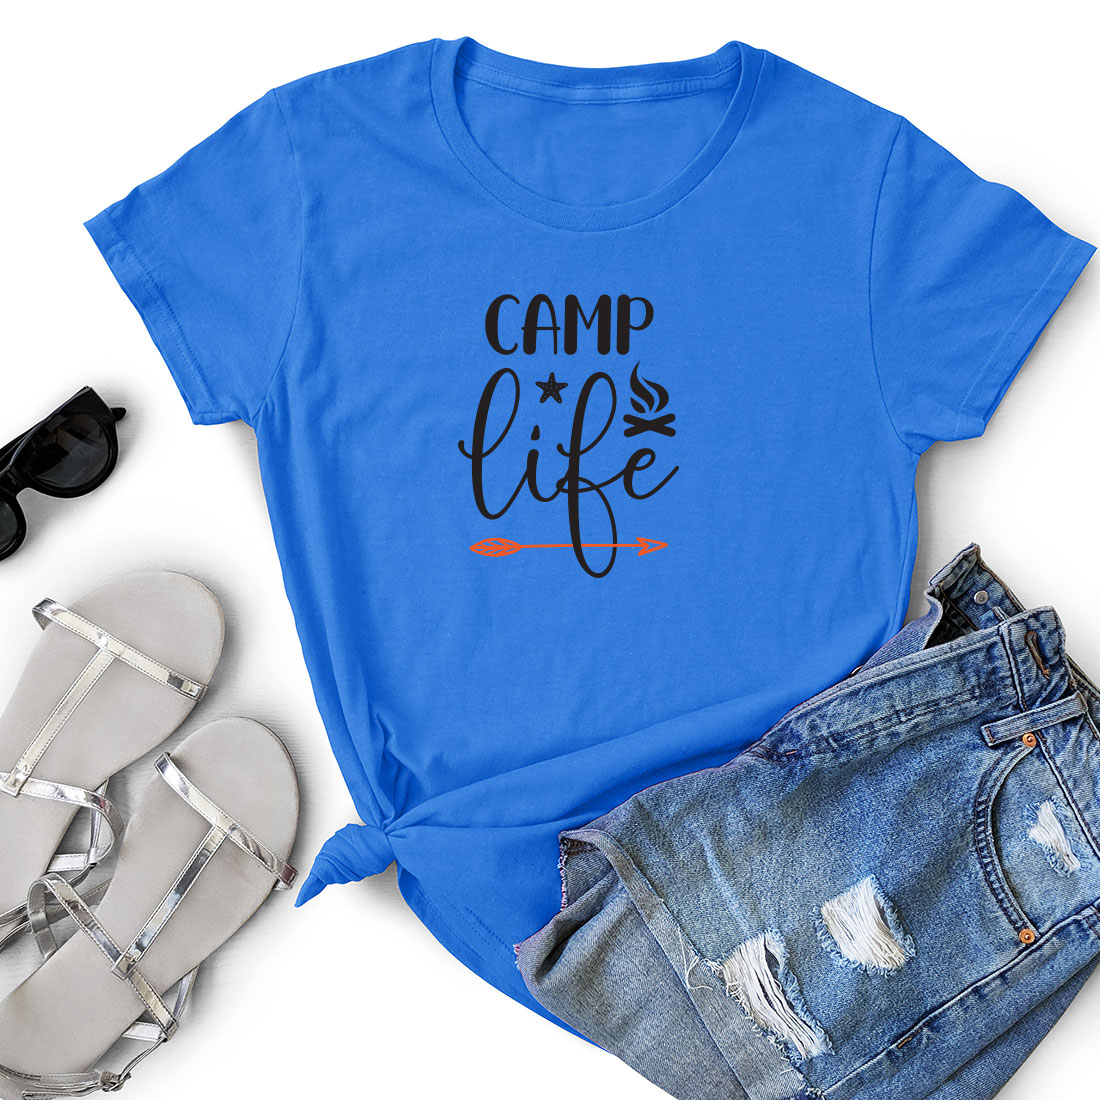 T - shirt that says camp life next to a pair of shorts.